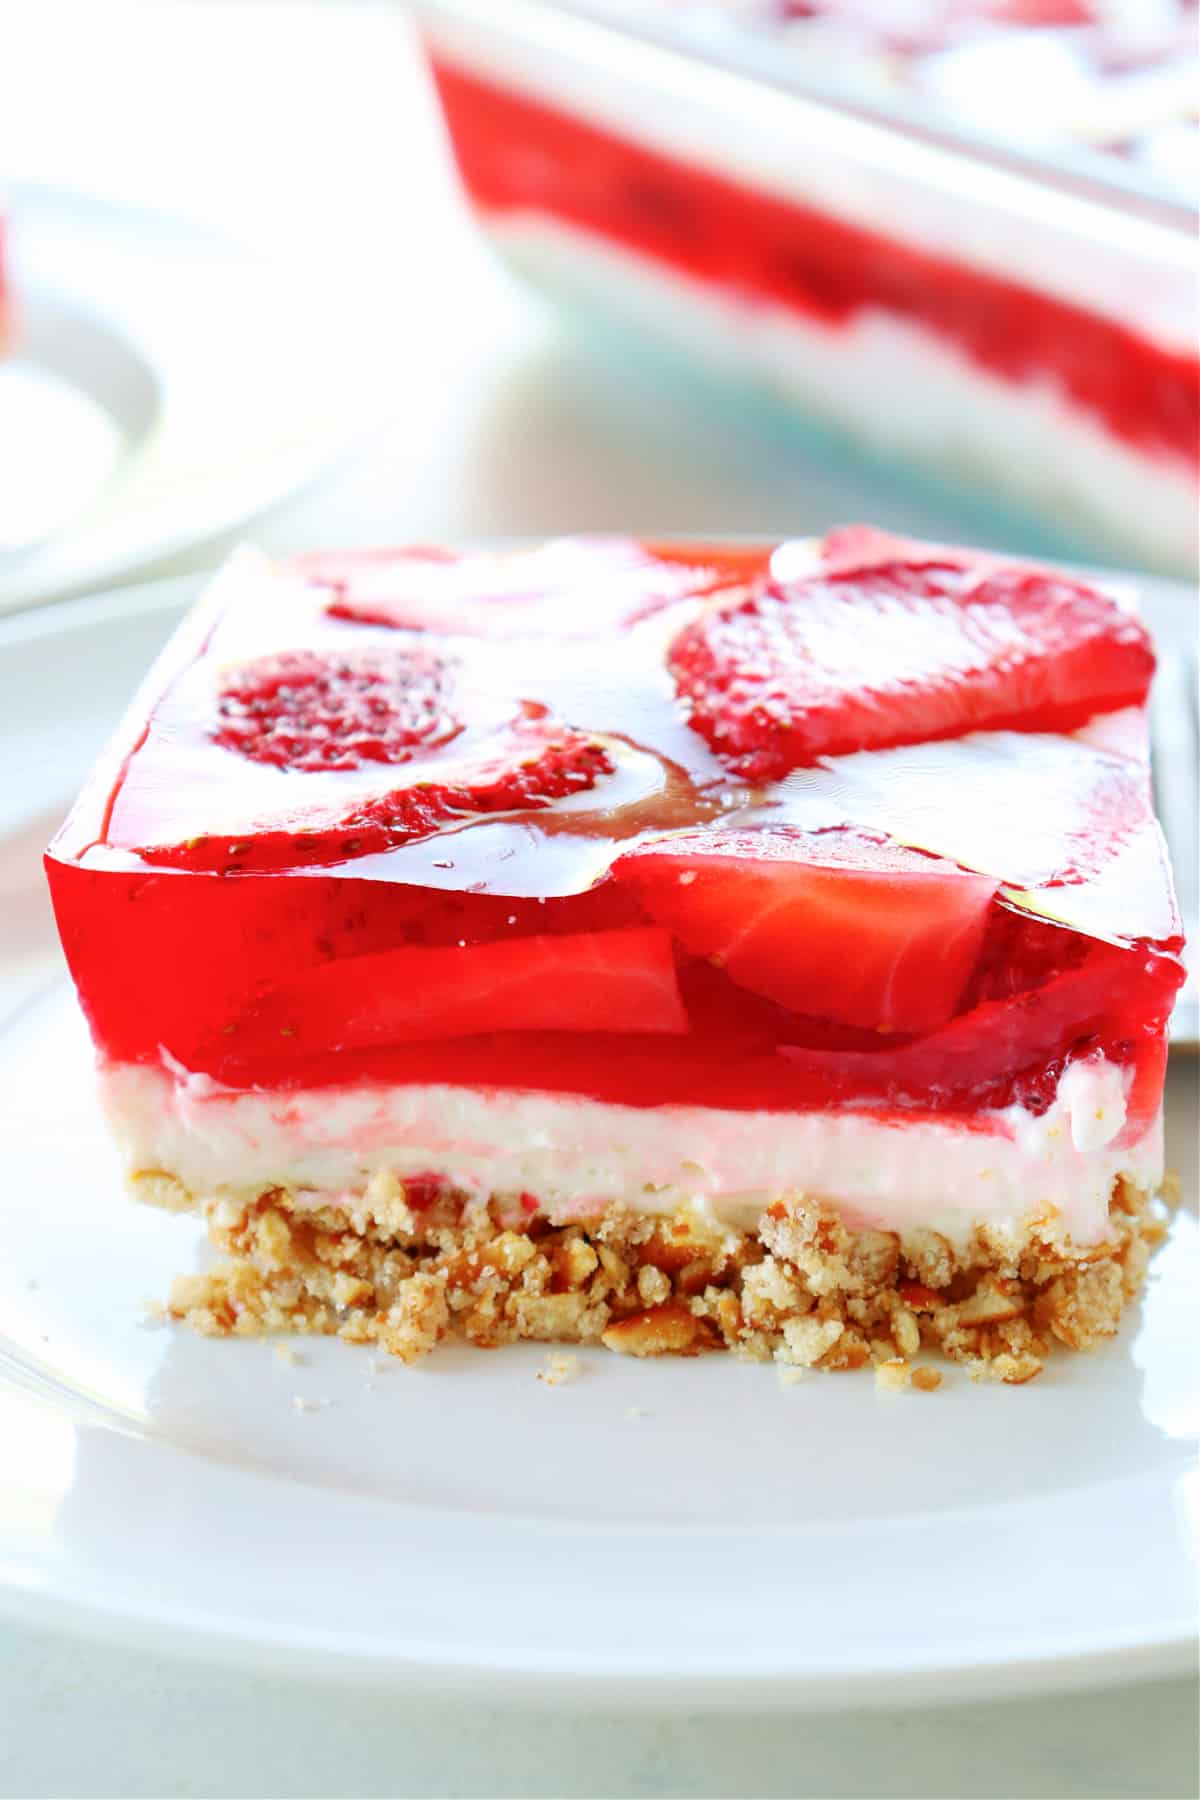 Square or strawberry pretzel salad on a plate.